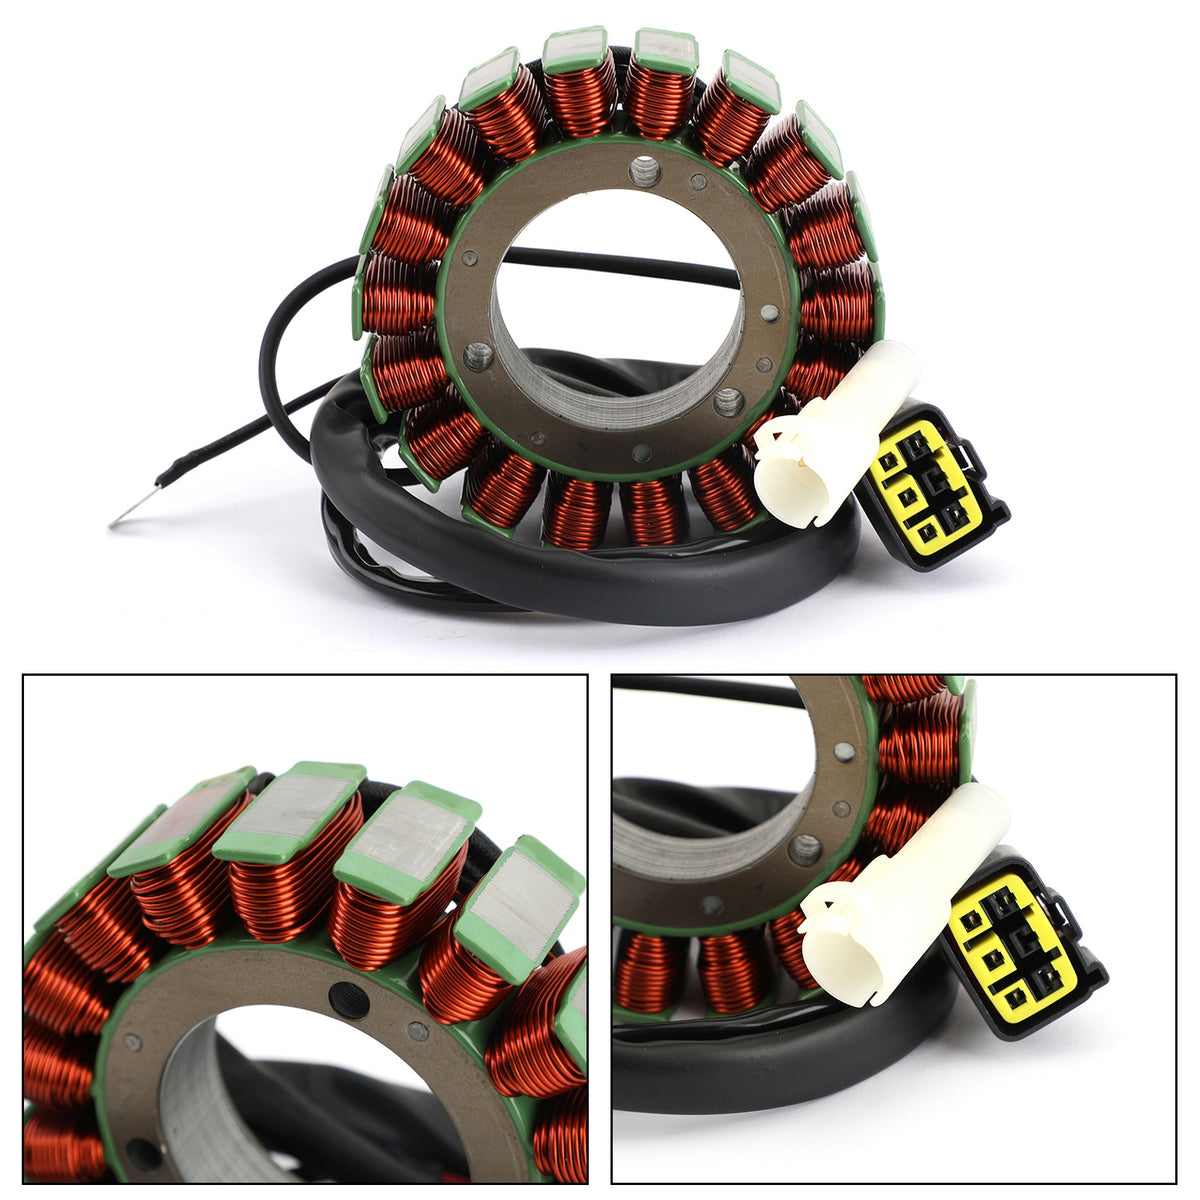 Magneto Generator Engine Stator Coil 6C5-81410-01 Fit For Yamaha FT60 FT50 F70 F60 F50 F40 2005-2017